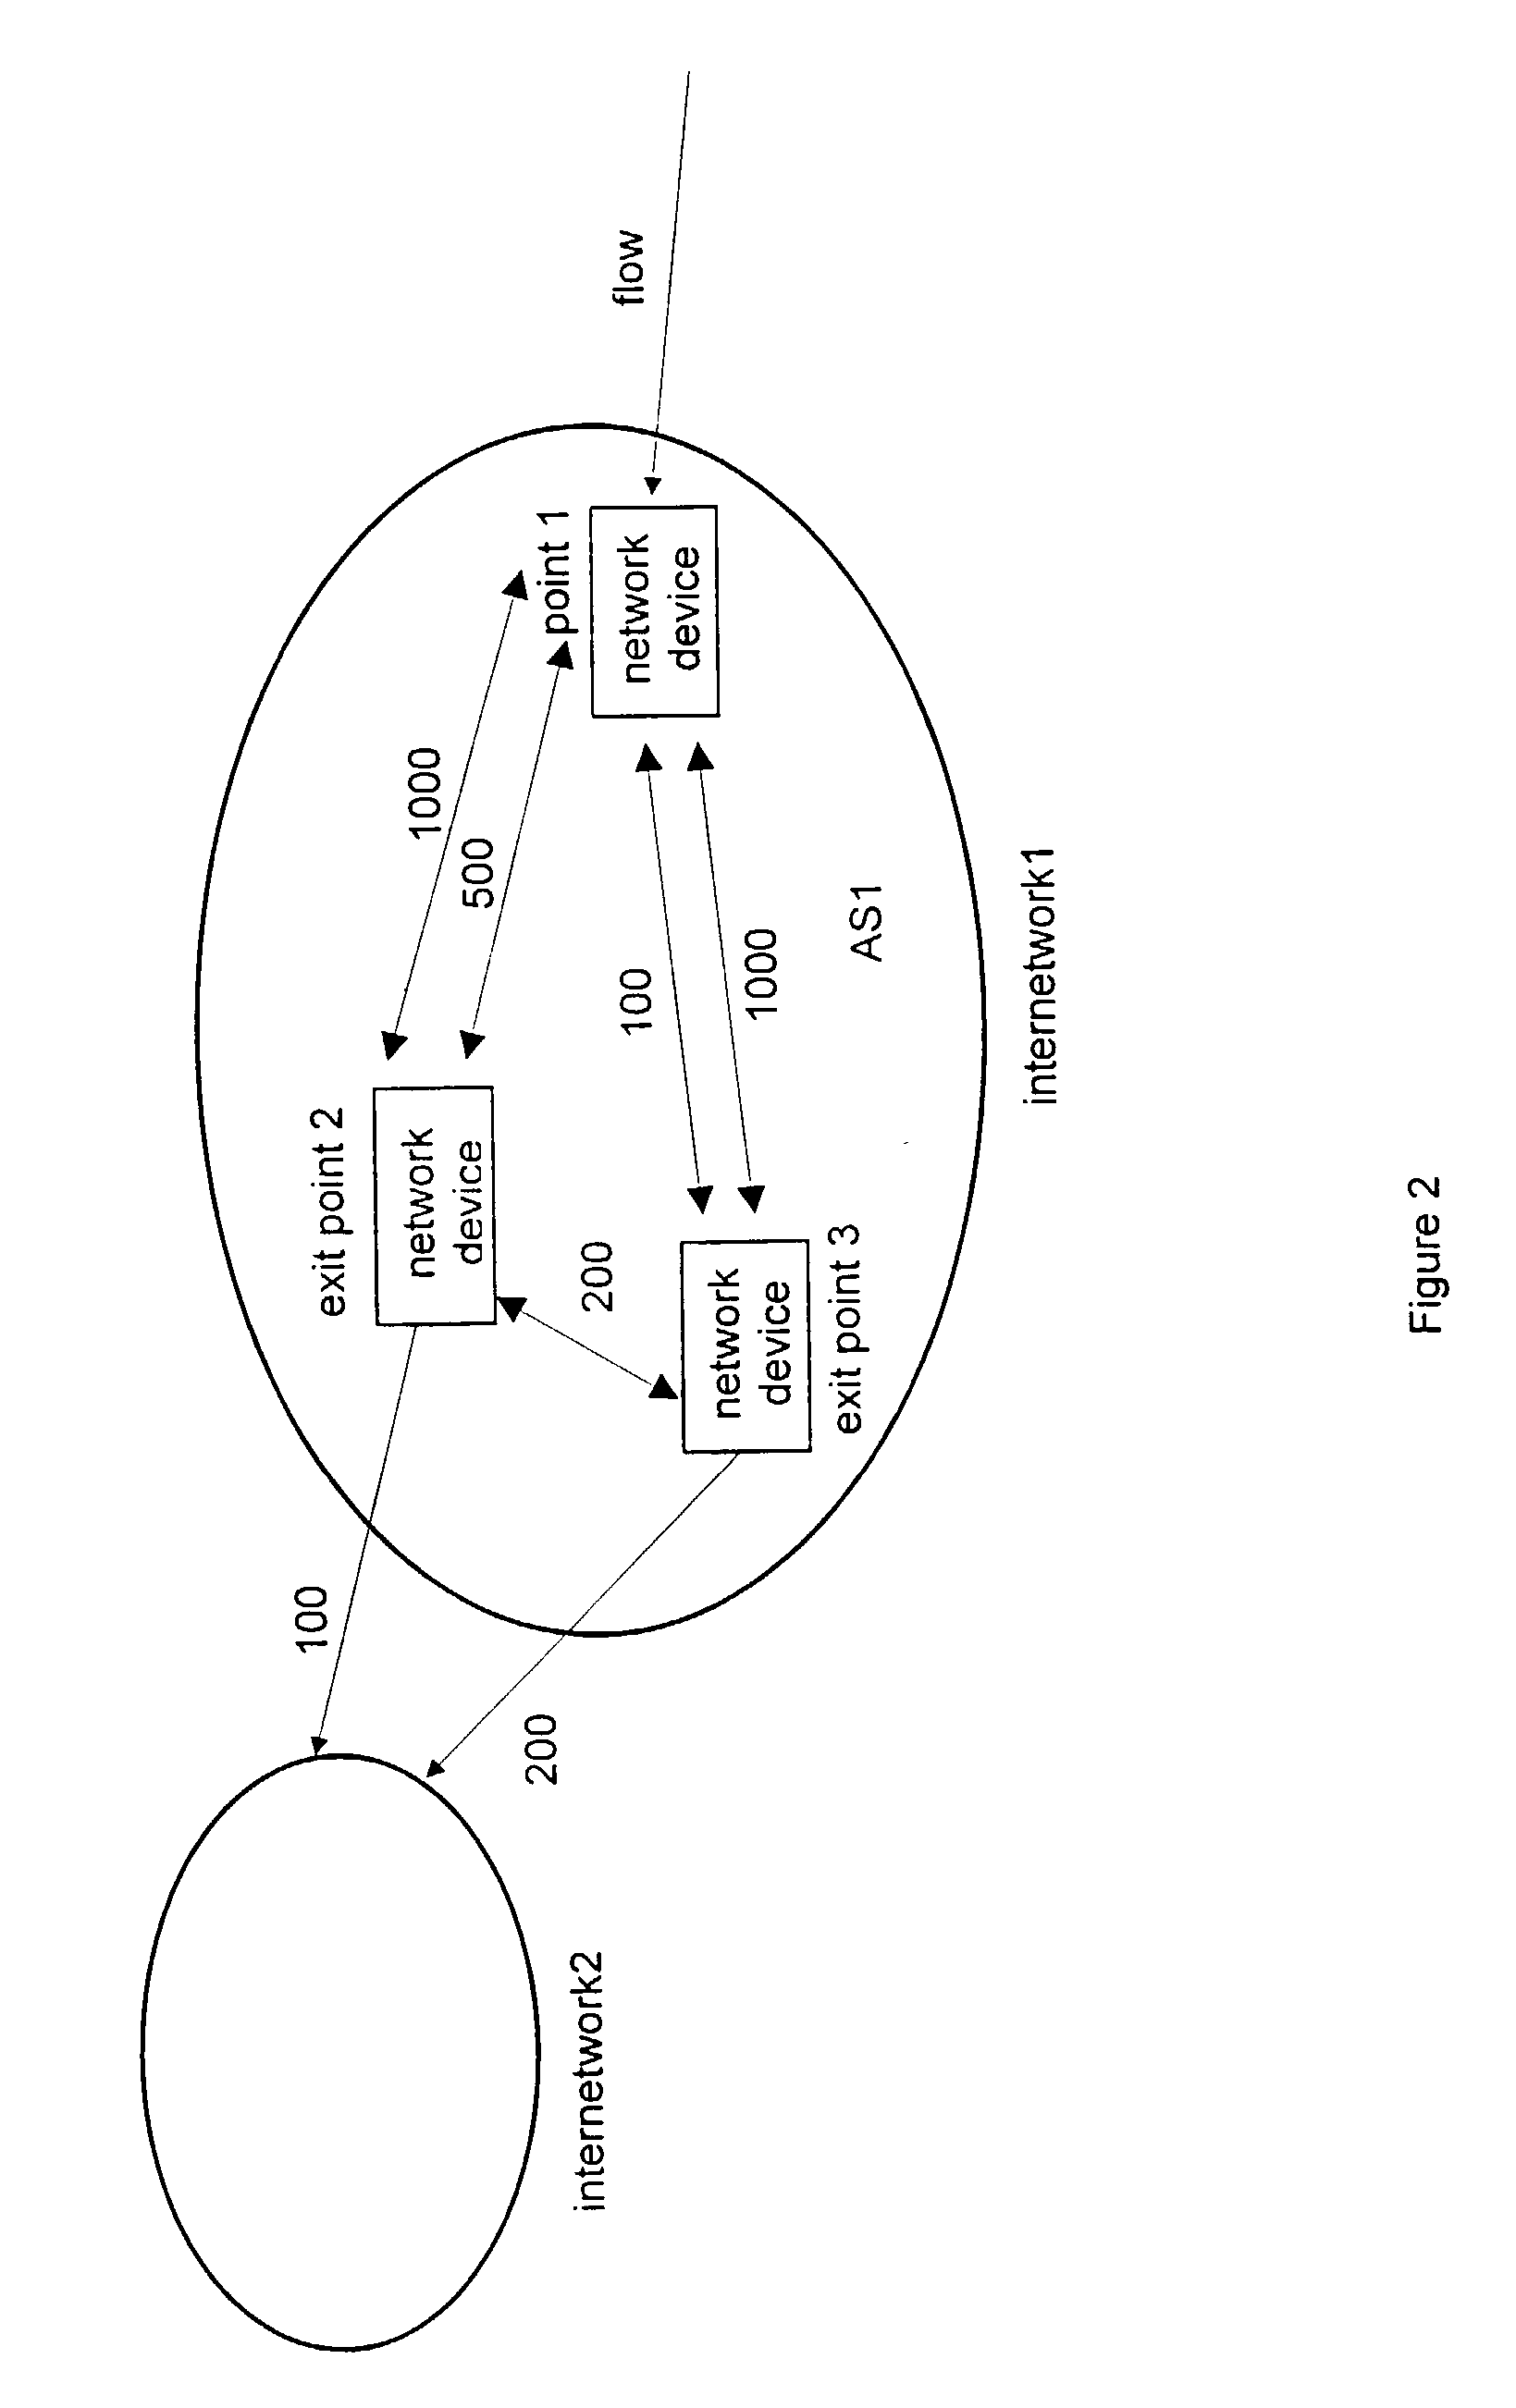 Method and apparatus for the assessment and optimization of network traffic